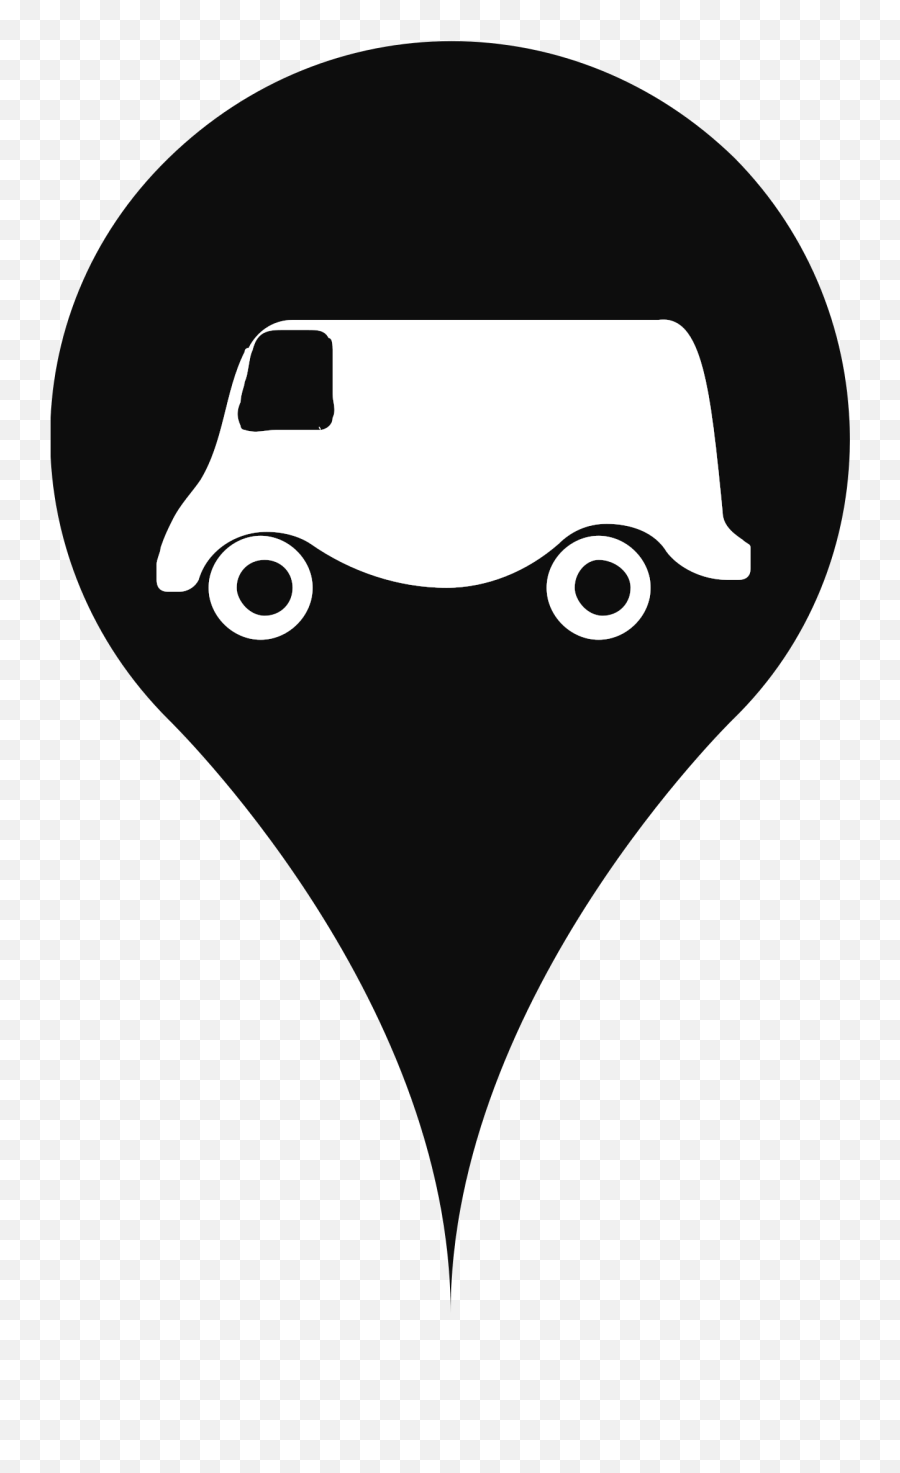 Filemap - Icontrucksvg Wikimedia Commons Png Images Icon Truck,Nap Icon